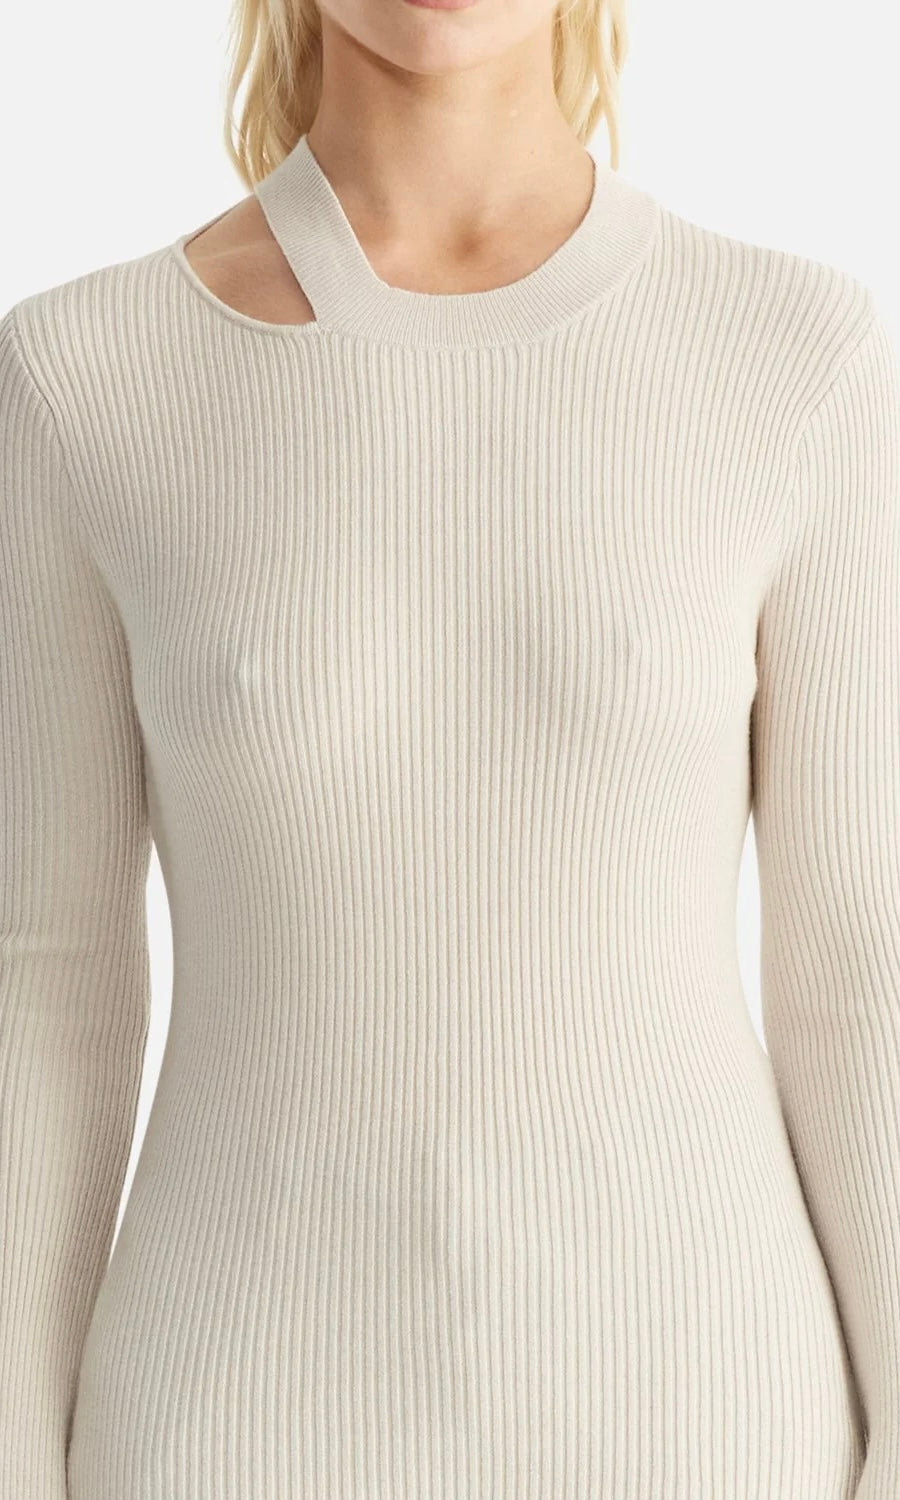 Ena Pelly Tamsin Knit Top In Birch